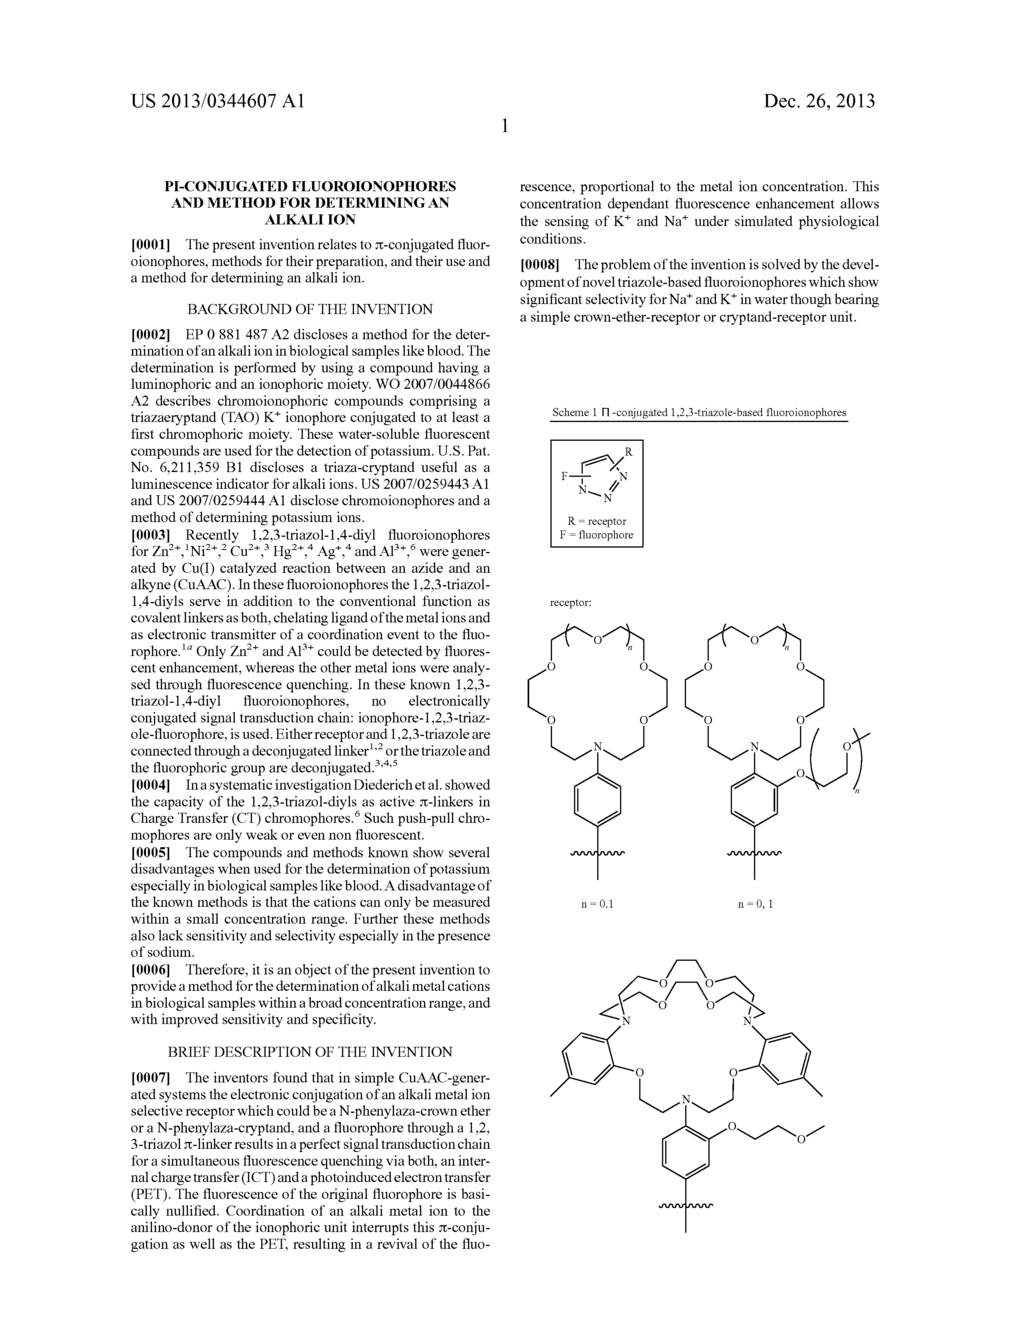 PI-CONJUGATED FLUOROIONOPHORES AND METHOD FOR DETERMINING AN ALKALI ION - diagram, schematic, and image 10